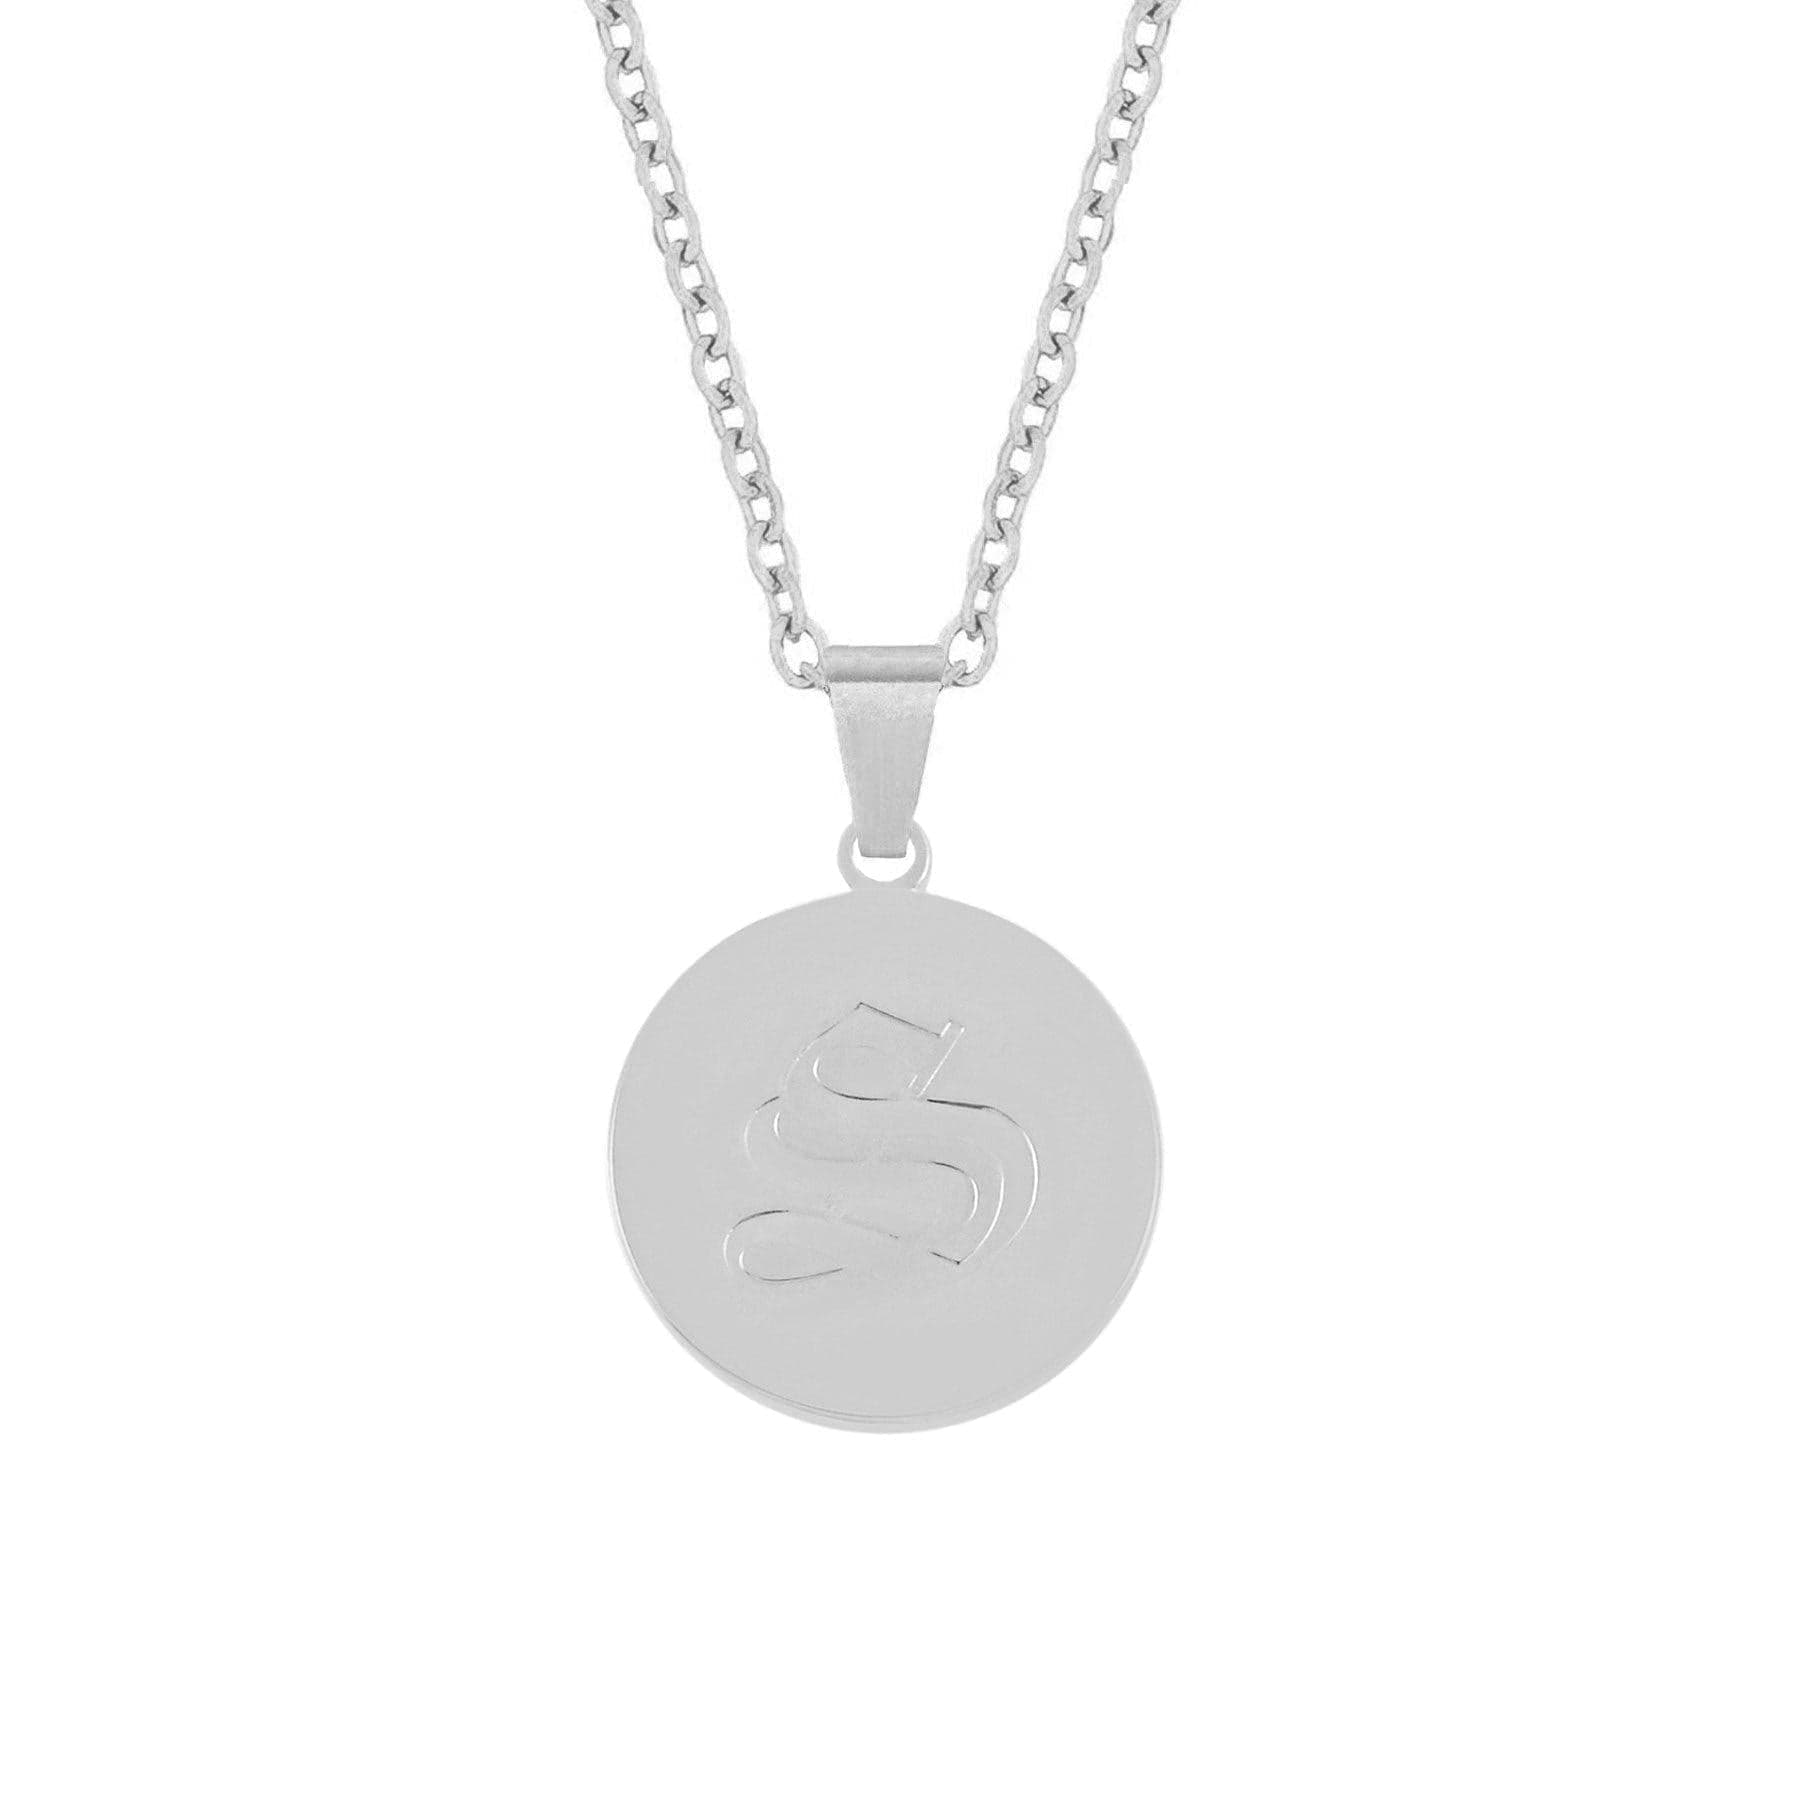 BohoMoon Stainless Steel Dolce Initial Necklace Silver / A